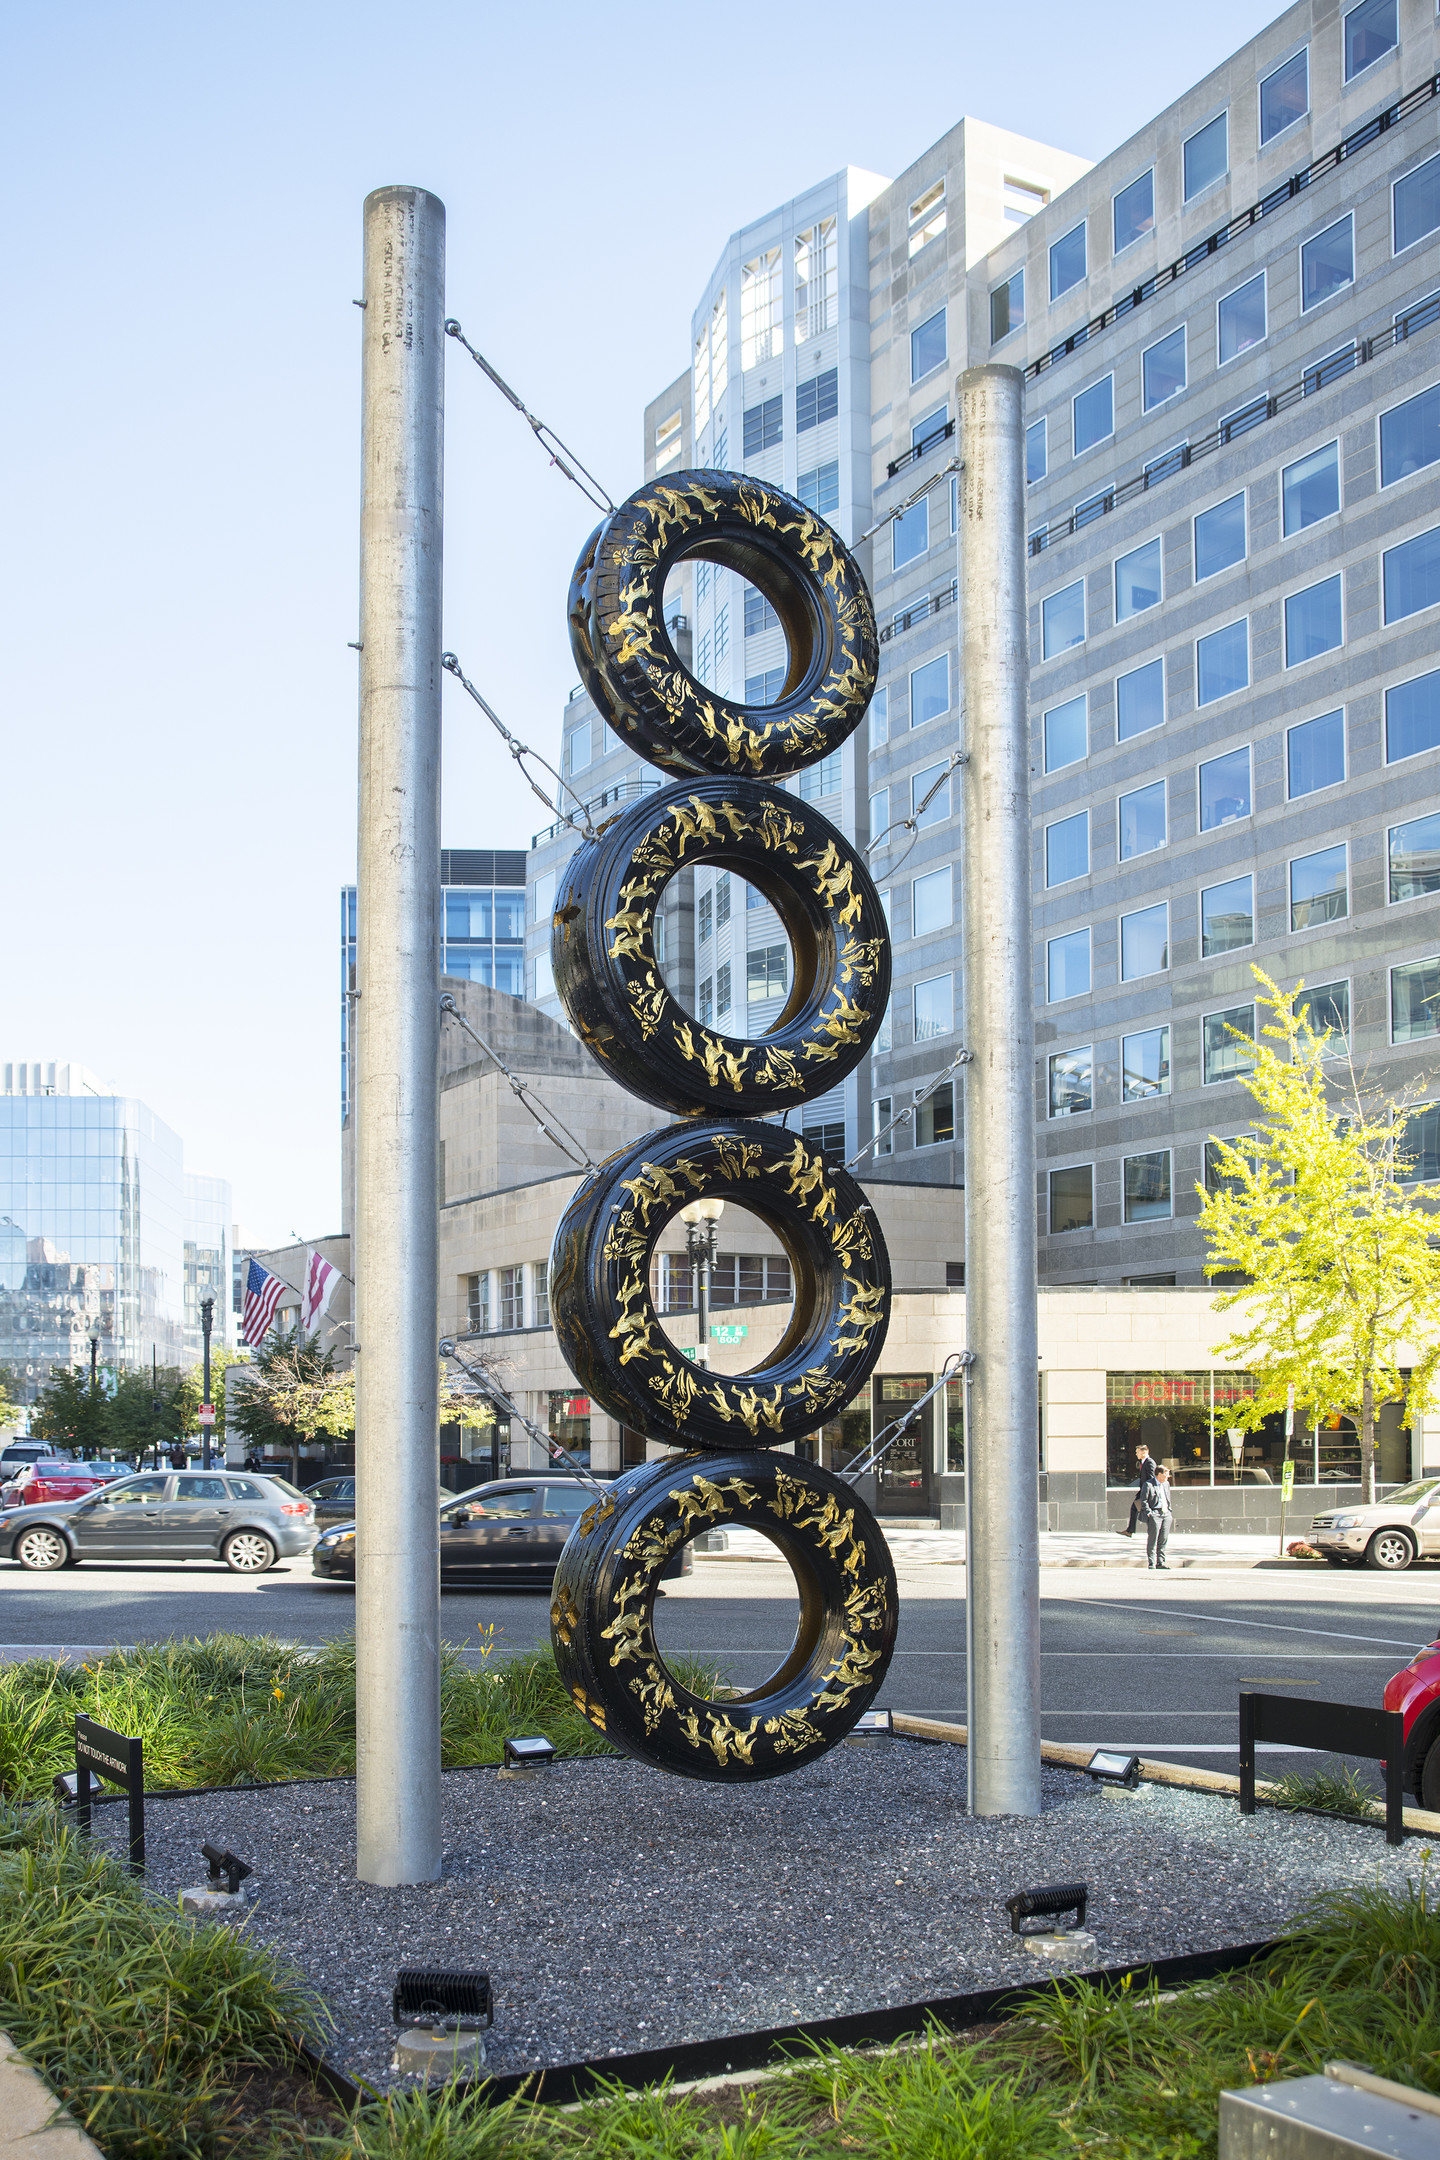 View of New York Avenue showing a tall, totem-like sculpture made of four stacked truck tires with gold leaf embellishments and supported by two steel poles.